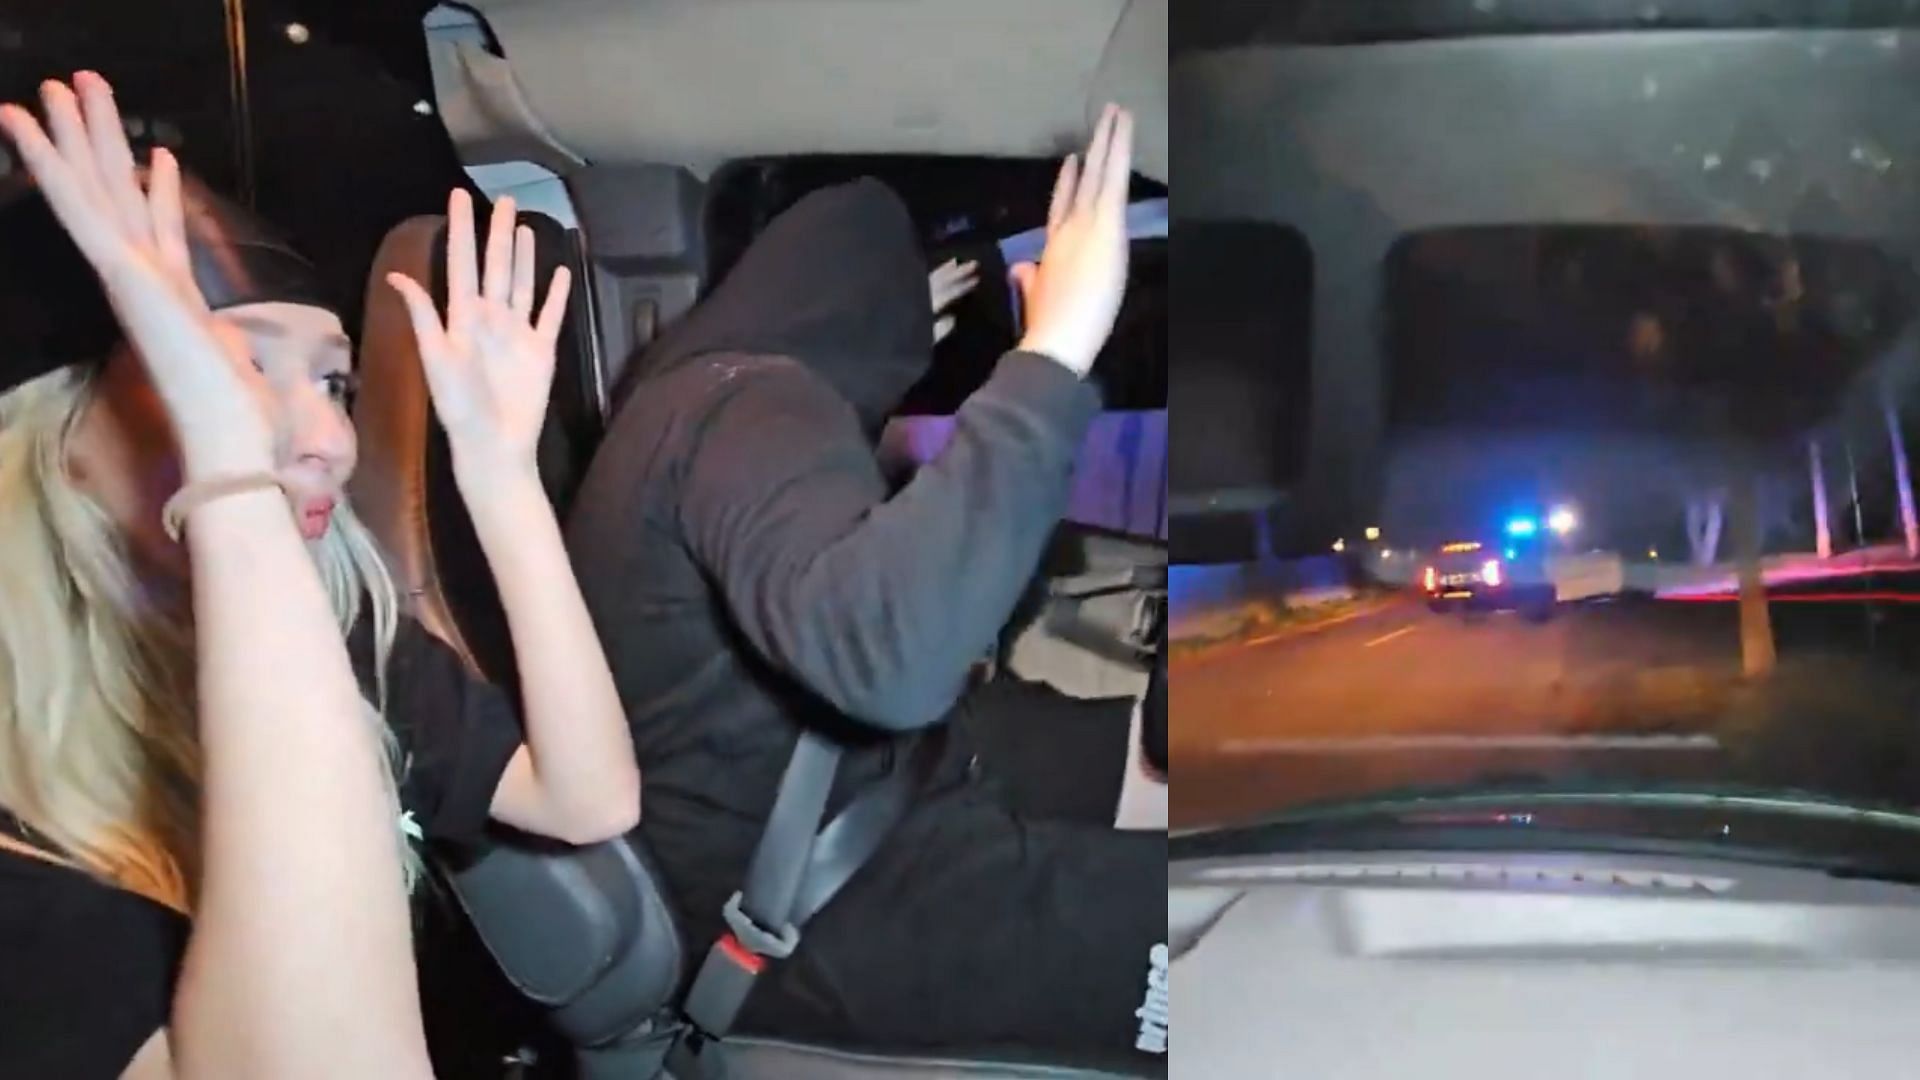 Kick streamer Natalie Reynolds and her crew gets pulled over on stream (Image via @FearedBuck/X)